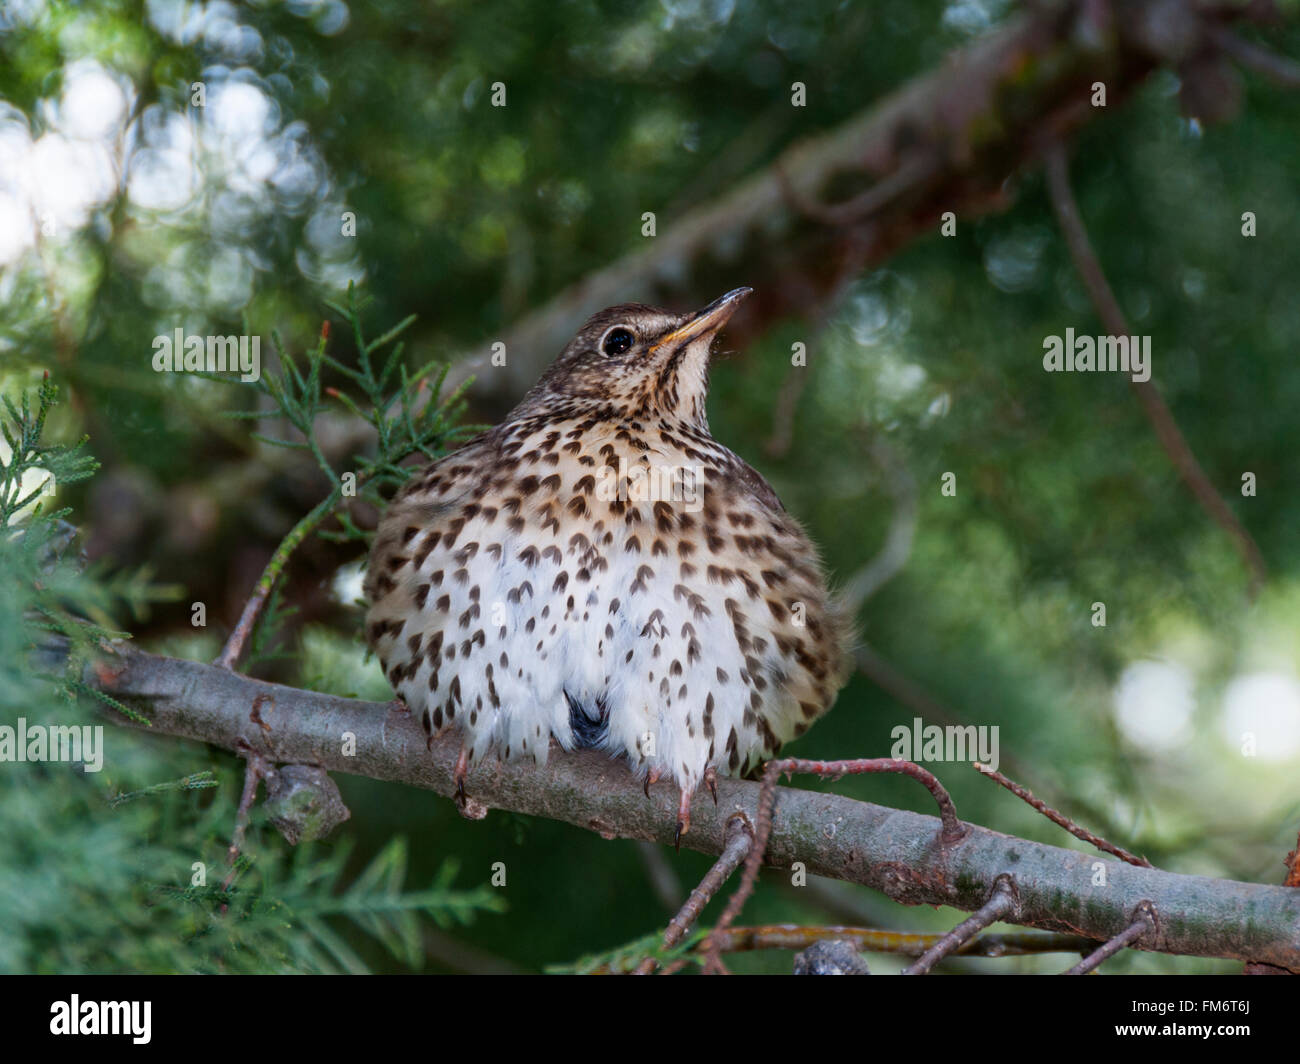 A song thrush with ruffled feathers Stock Photo